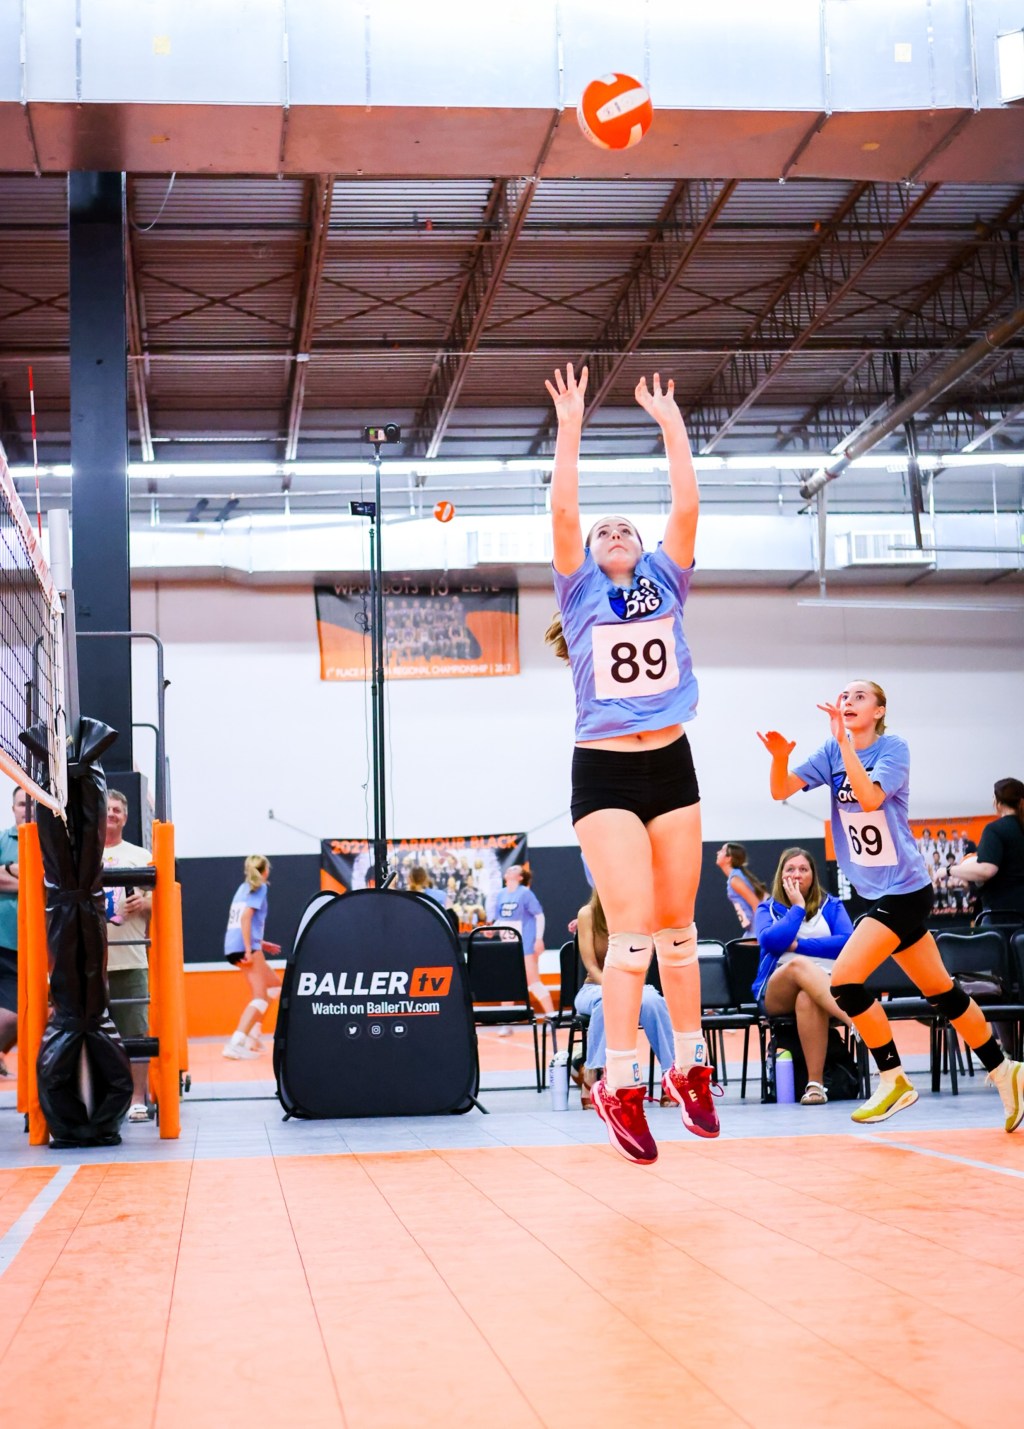 Sunshine Classic Showcase &#8211; Top Performers Setters Wk. 1 &#8211; Pt. 2